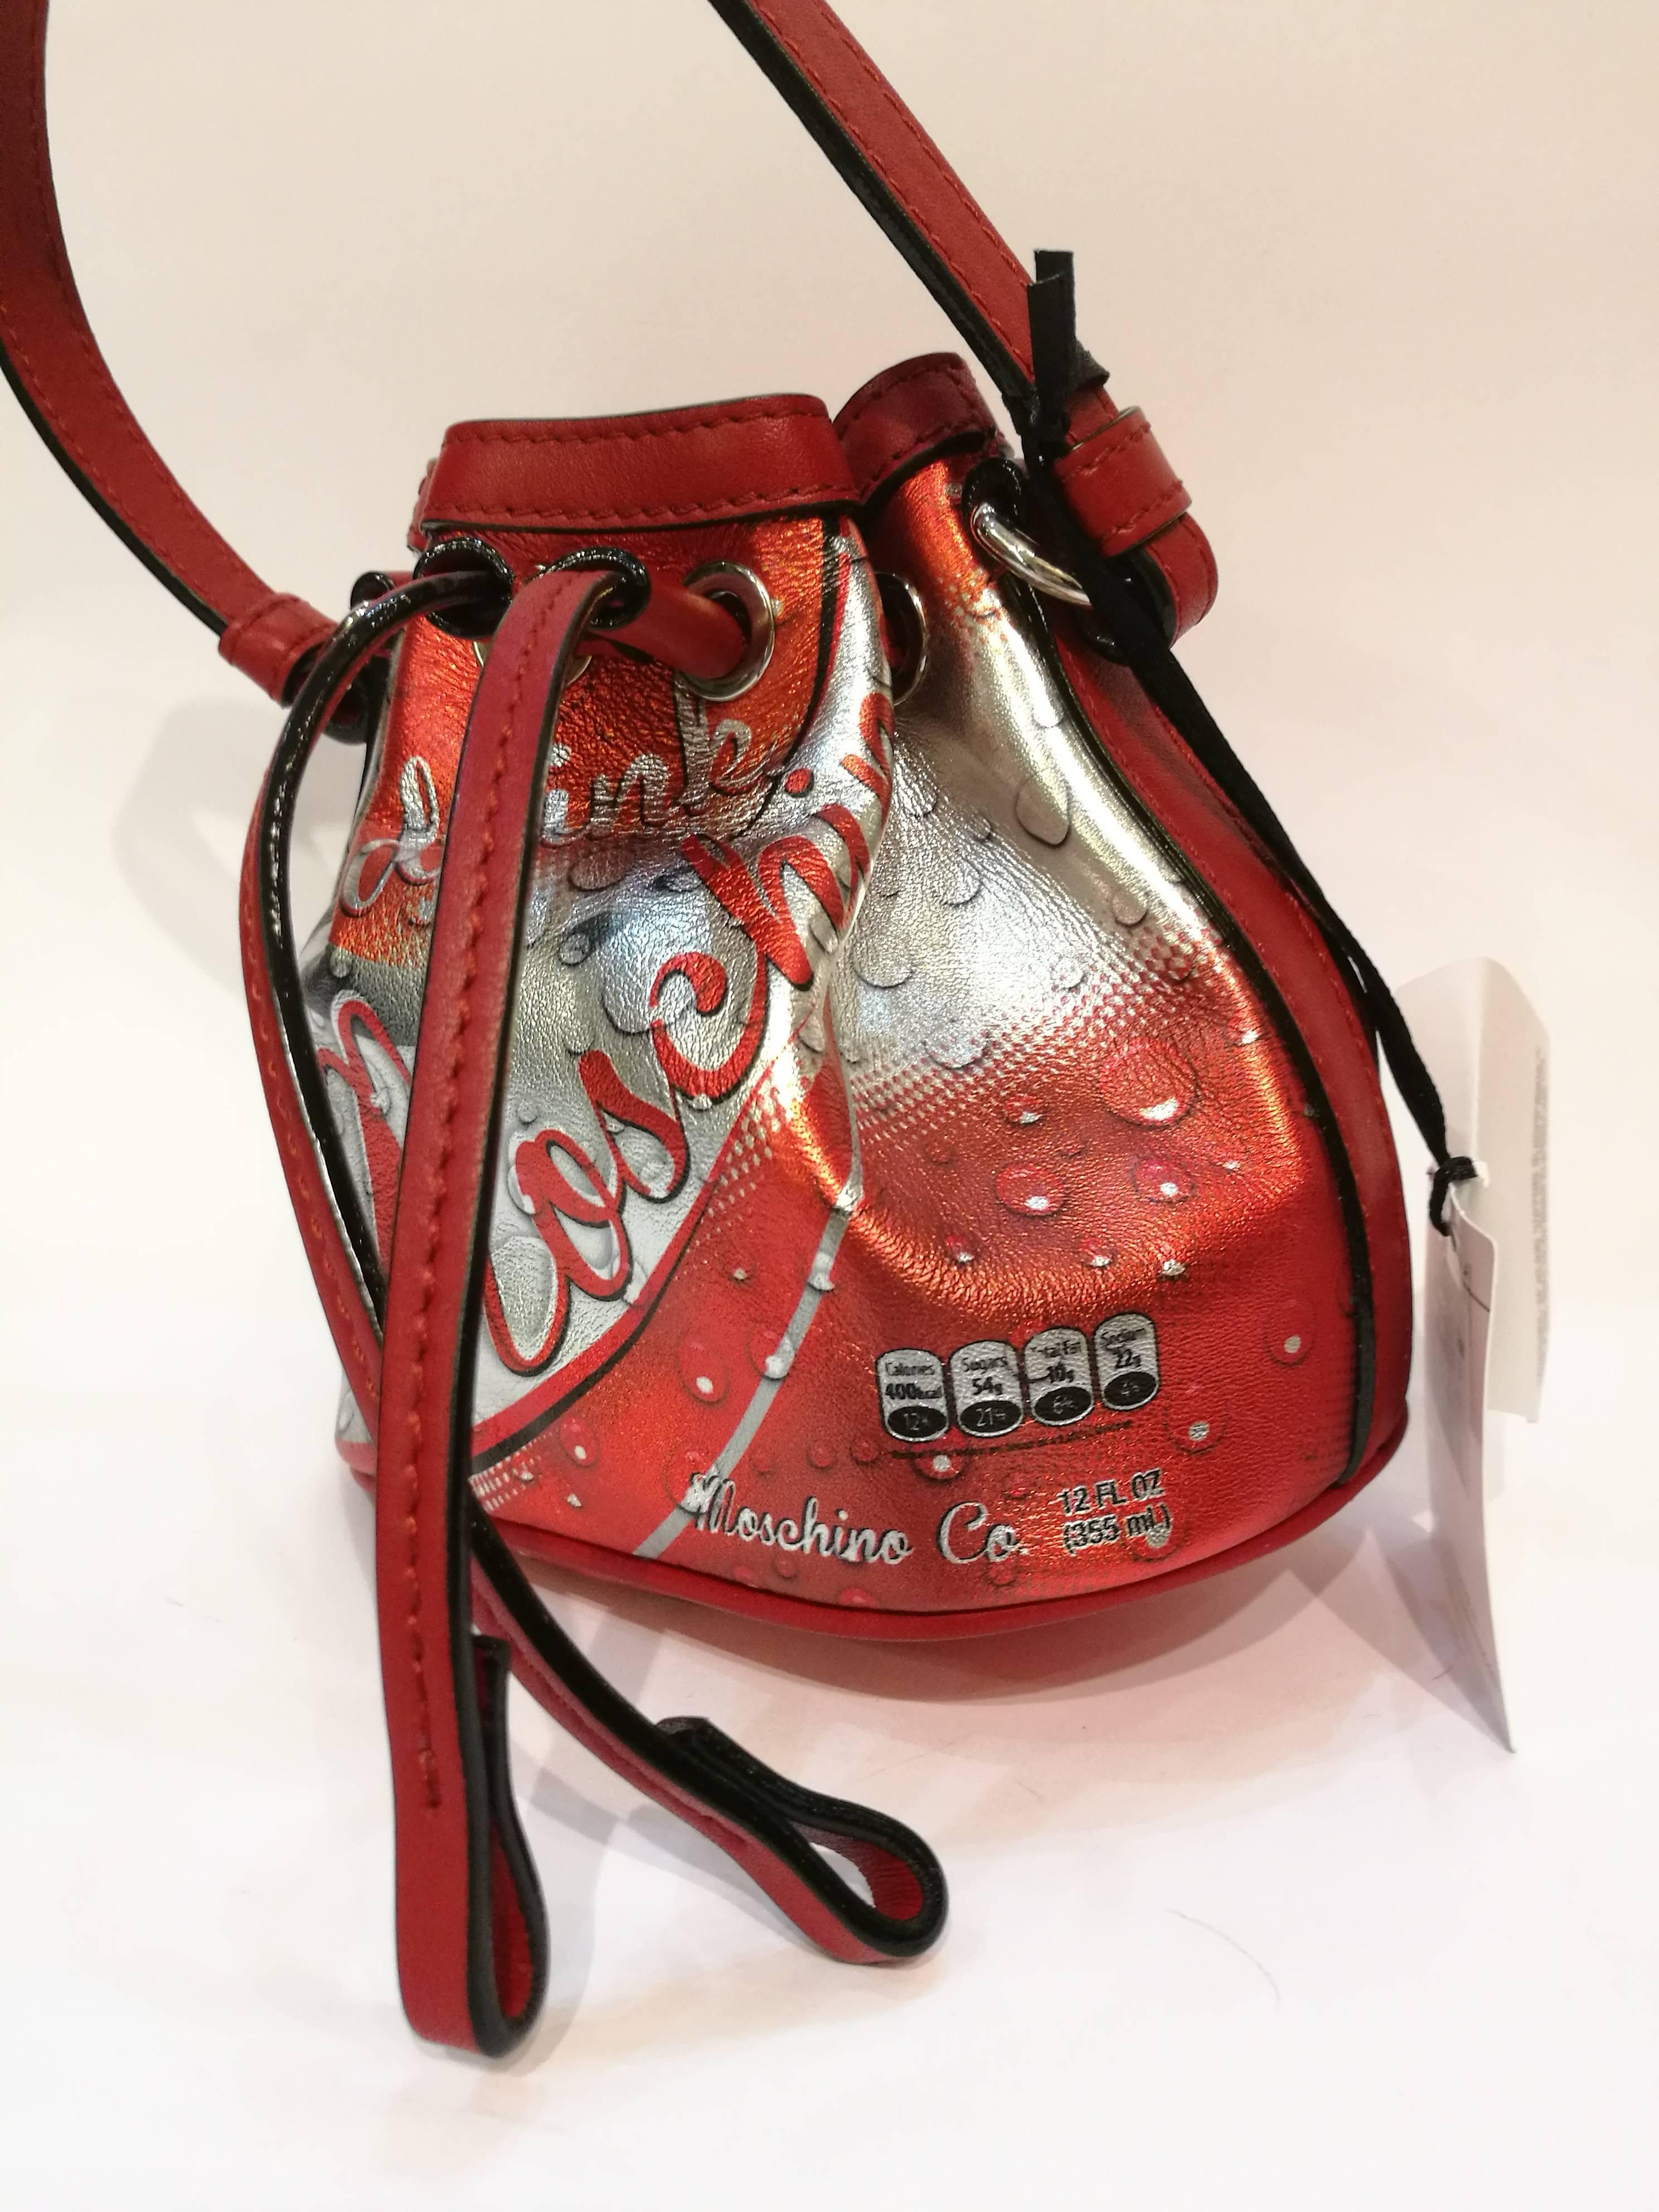 Moschino Red Coca Cola Satchel NWOT
Drink Moschino small leather bag made from 100% sheepskin. Coca Cola design in red / silver color. Bag has a removable shoulder strap. Ideal for combination with Drink Moschino mobile phone case, of course also